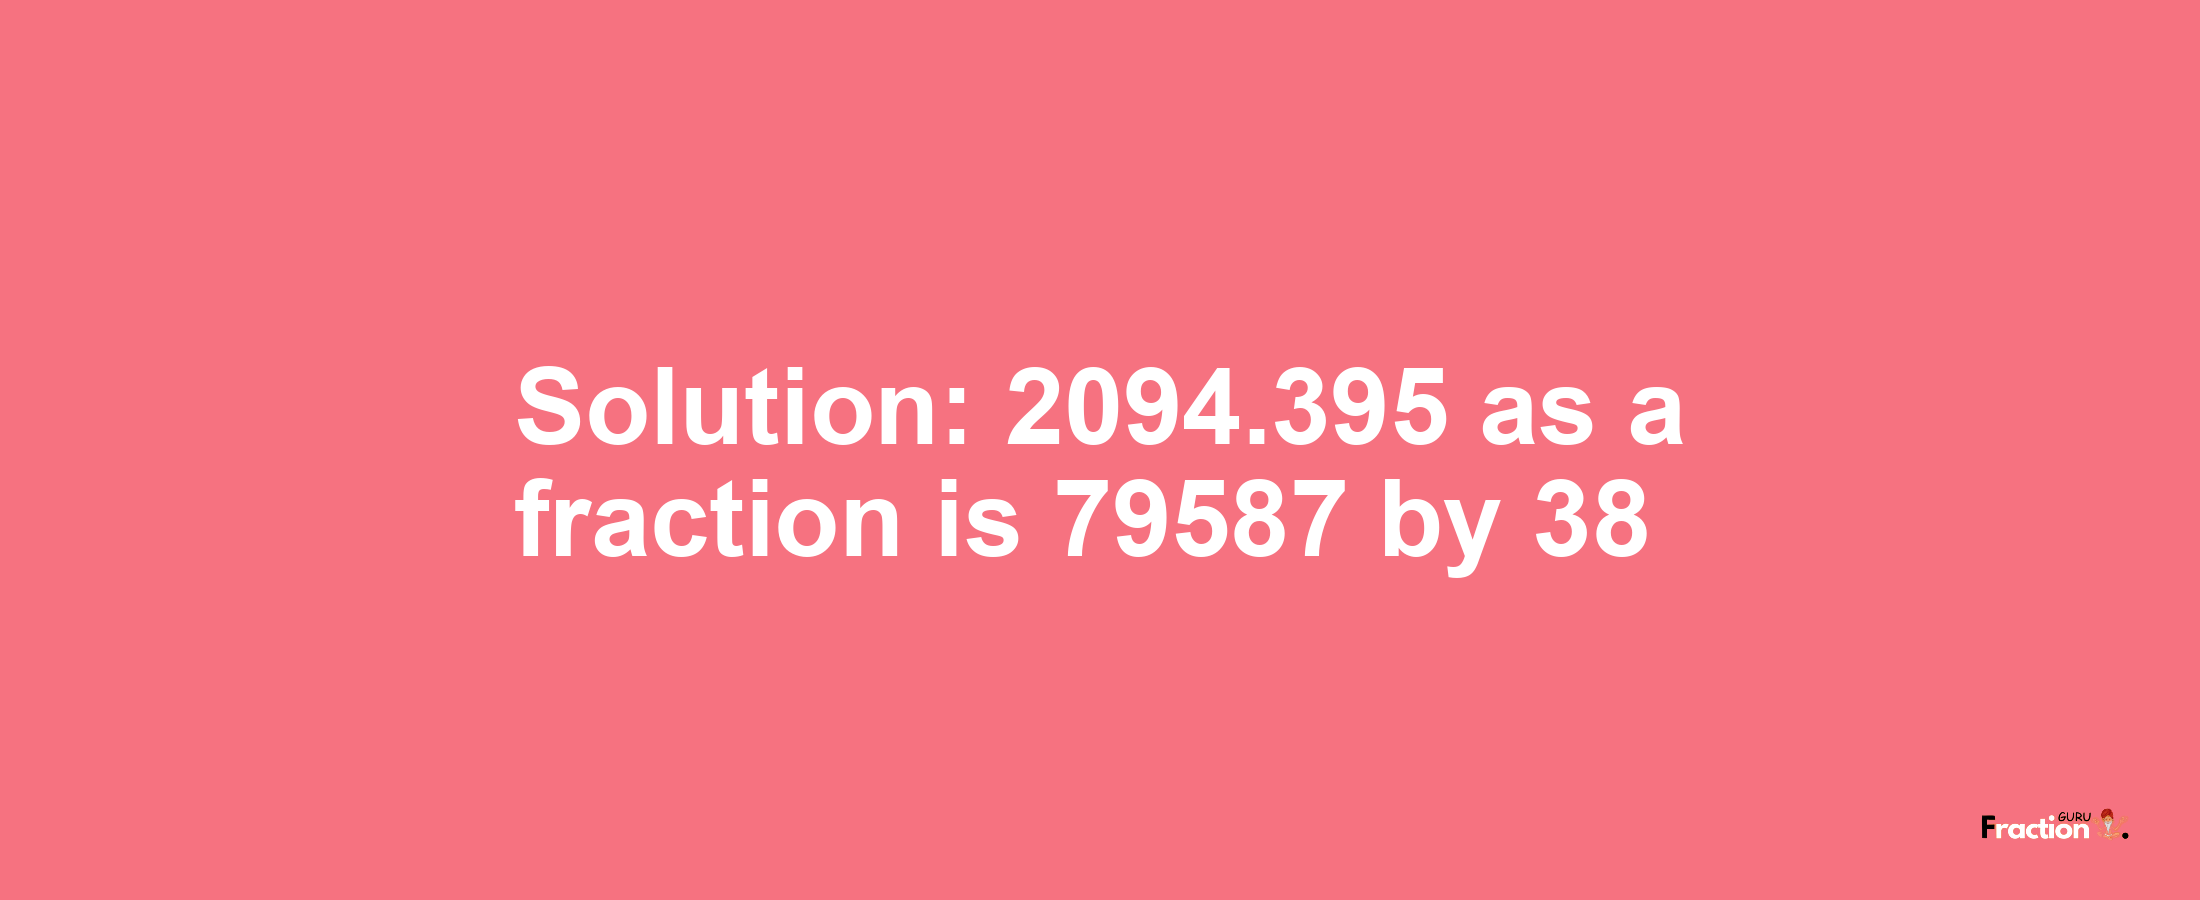 Solution:2094.395 as a fraction is 79587/38